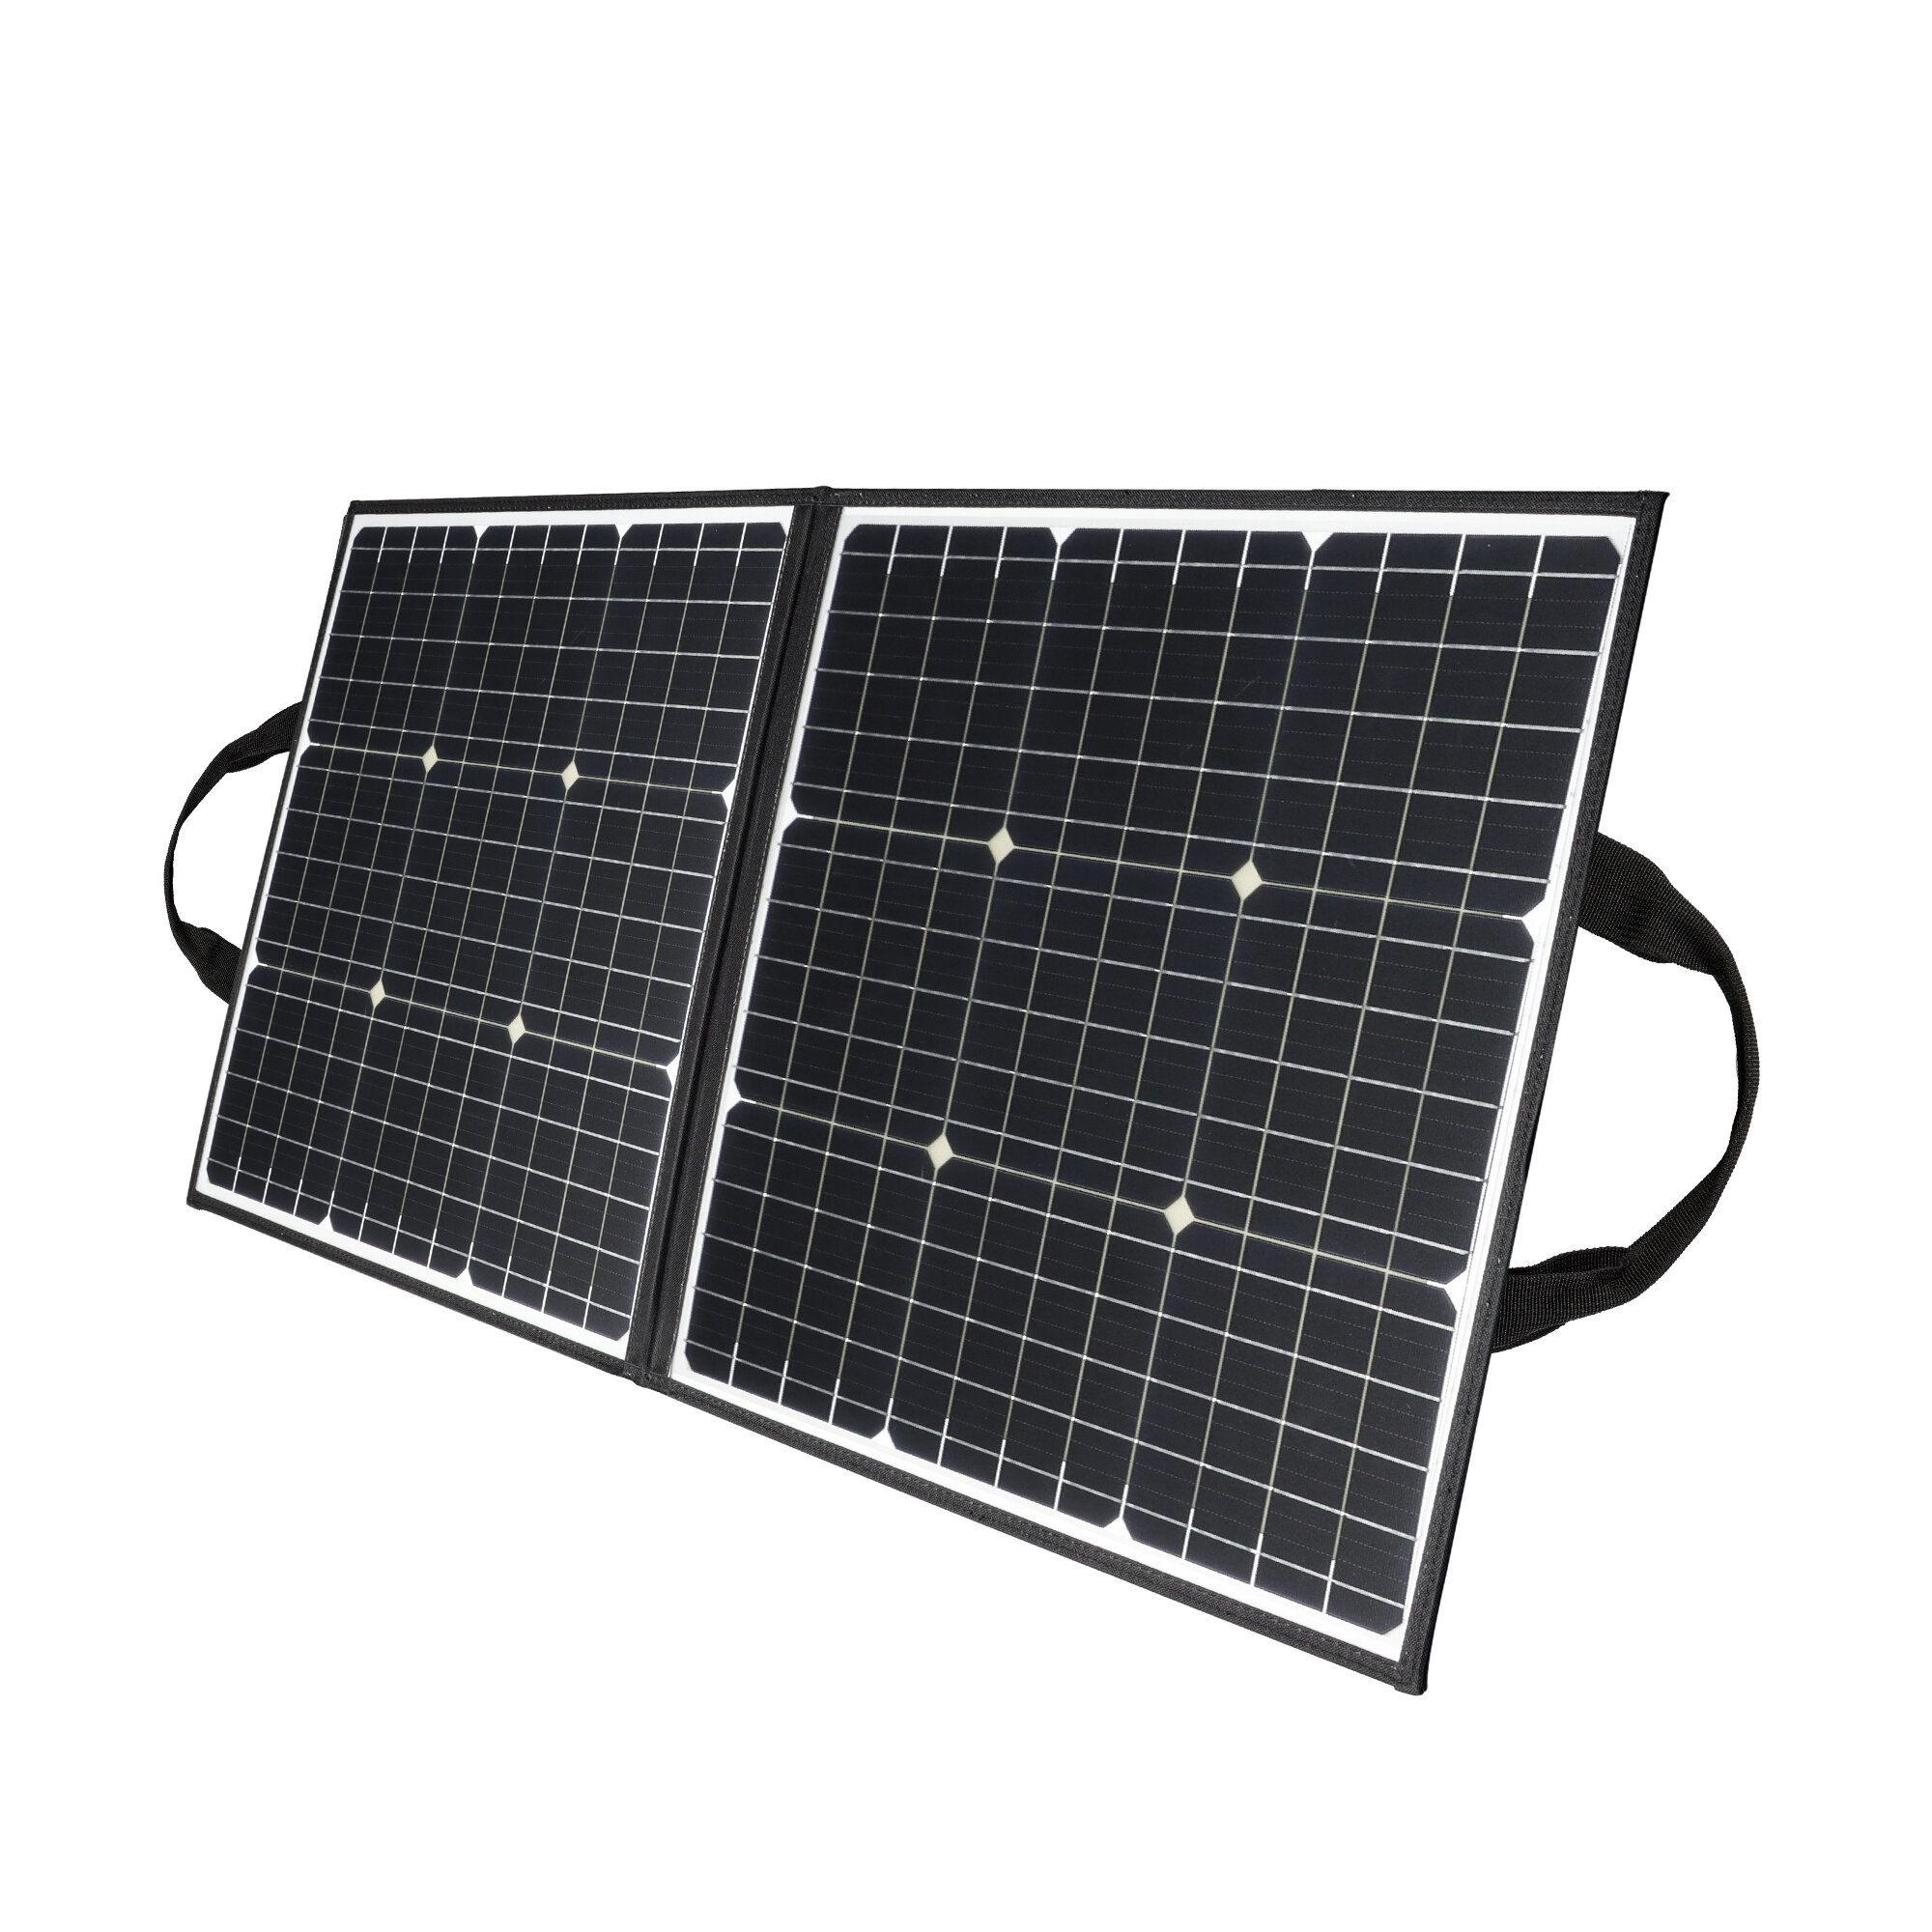 [US Direct] FlashFish 100W 18V Portable Solar Panel 5V USB Foldable Solar Cells Outdoor Power Supply Camping Garden Solar Charger For Power Station COD